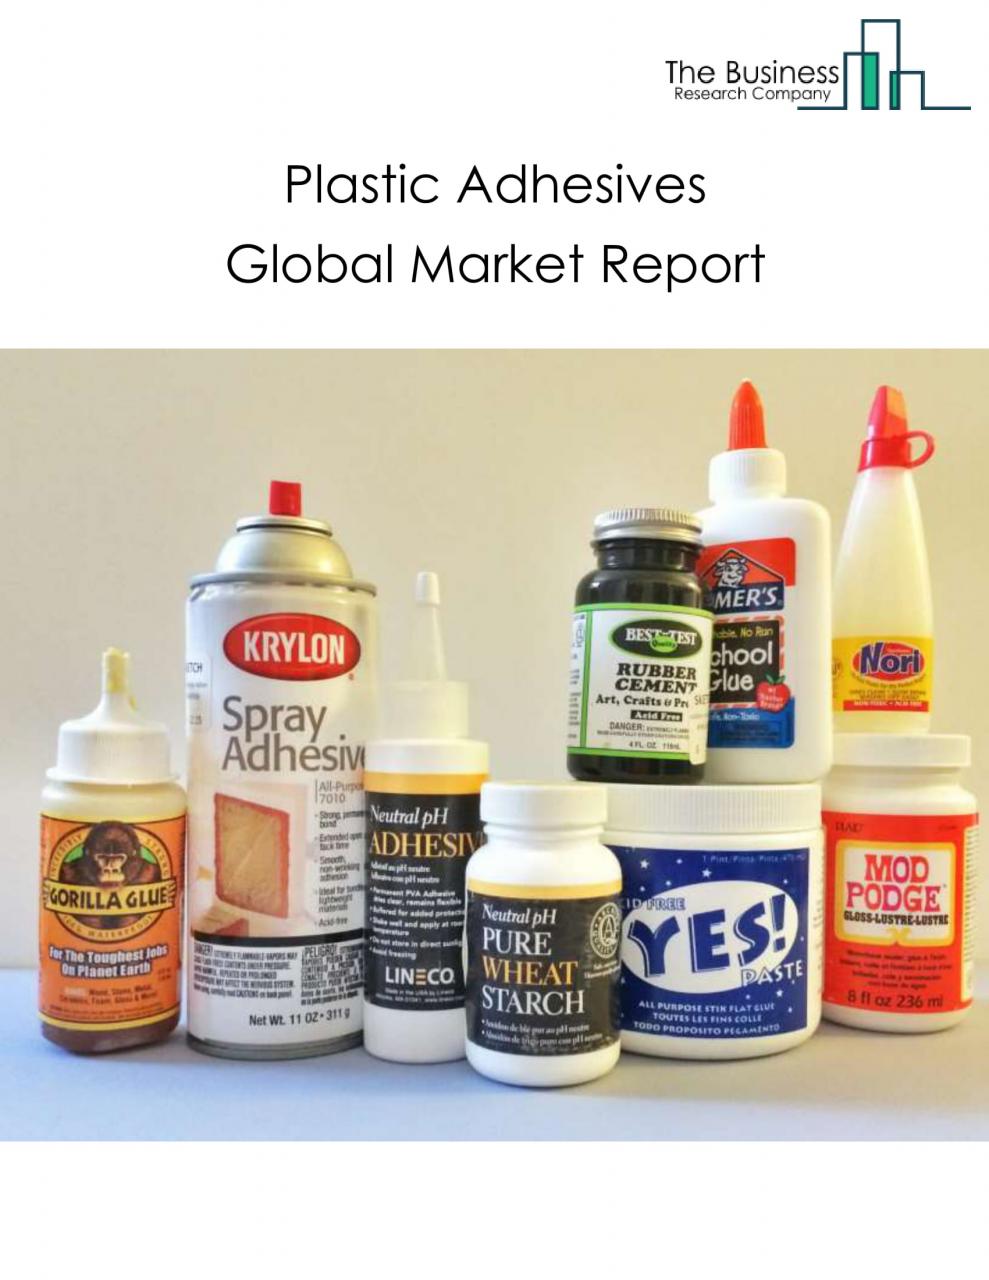 Global Plastic Adhesives Market Data And Industry Growth Analysis